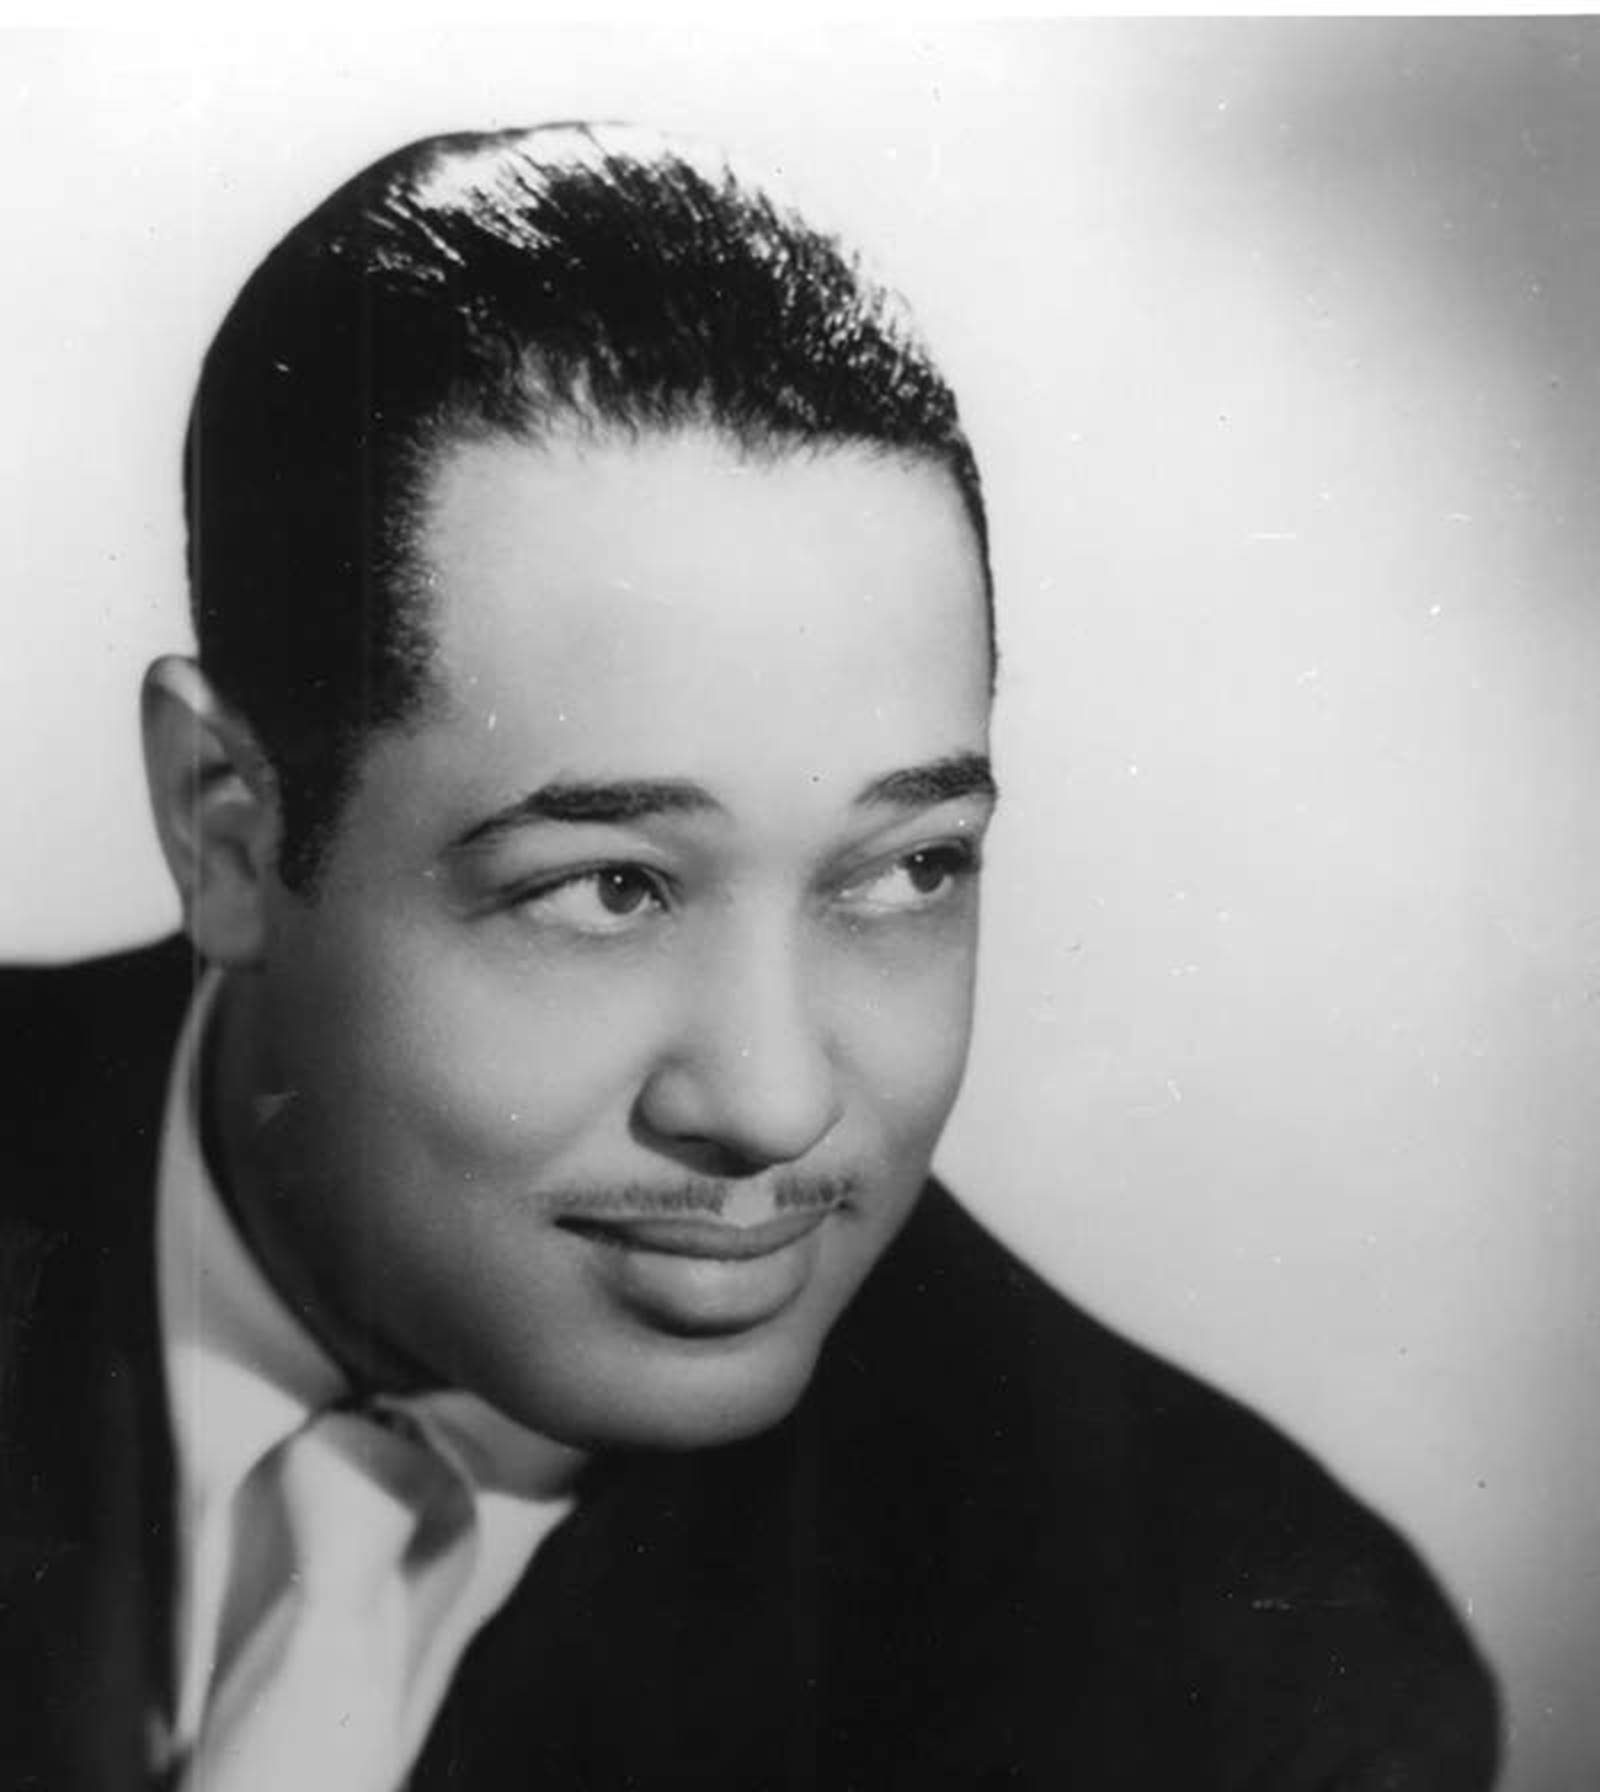 A young Duke Ellington gazes off camera with a smile in black and white photo